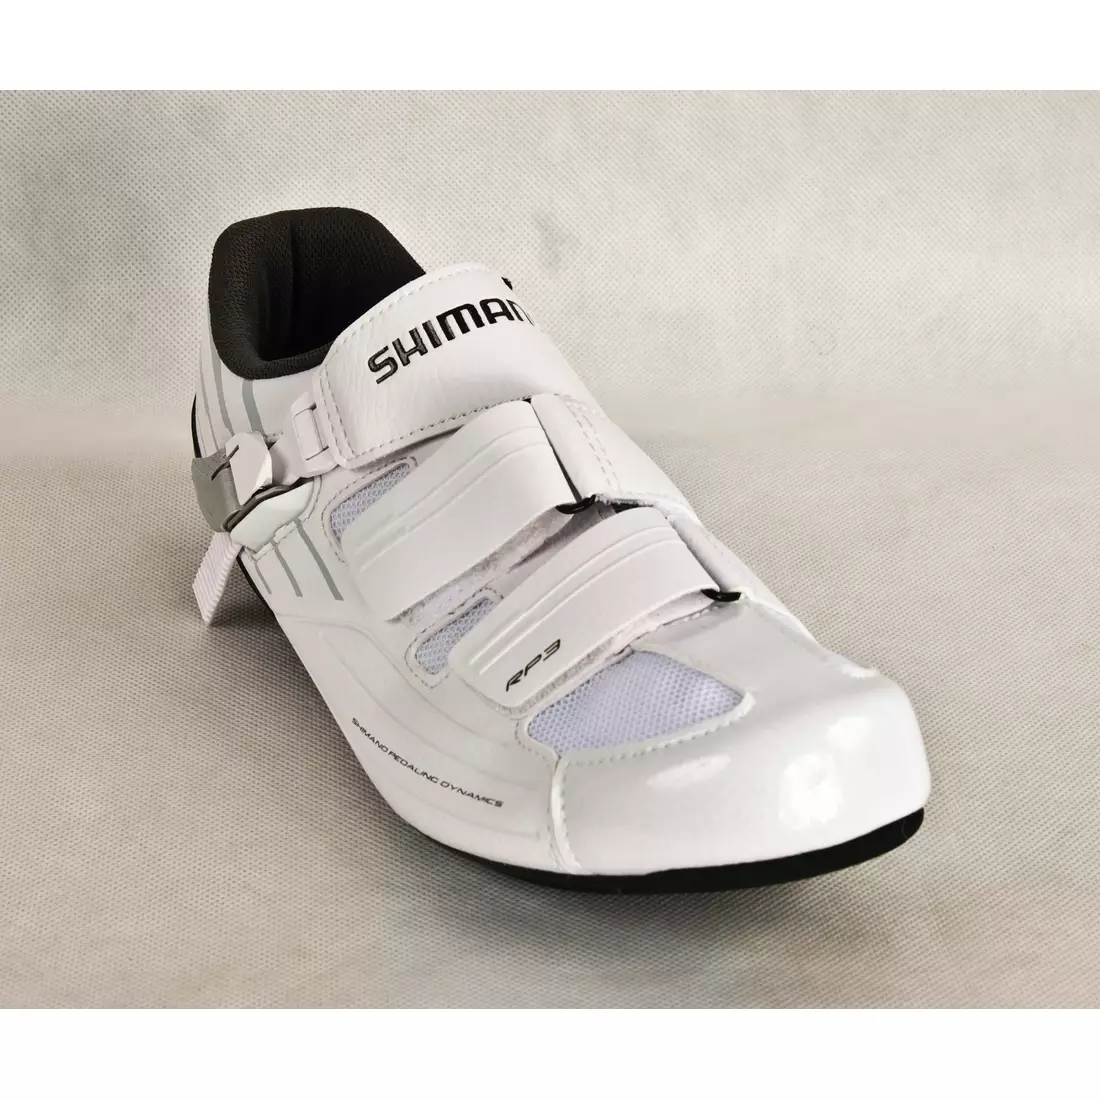 SHIMANO SHRP300SW road cycling shoes, white